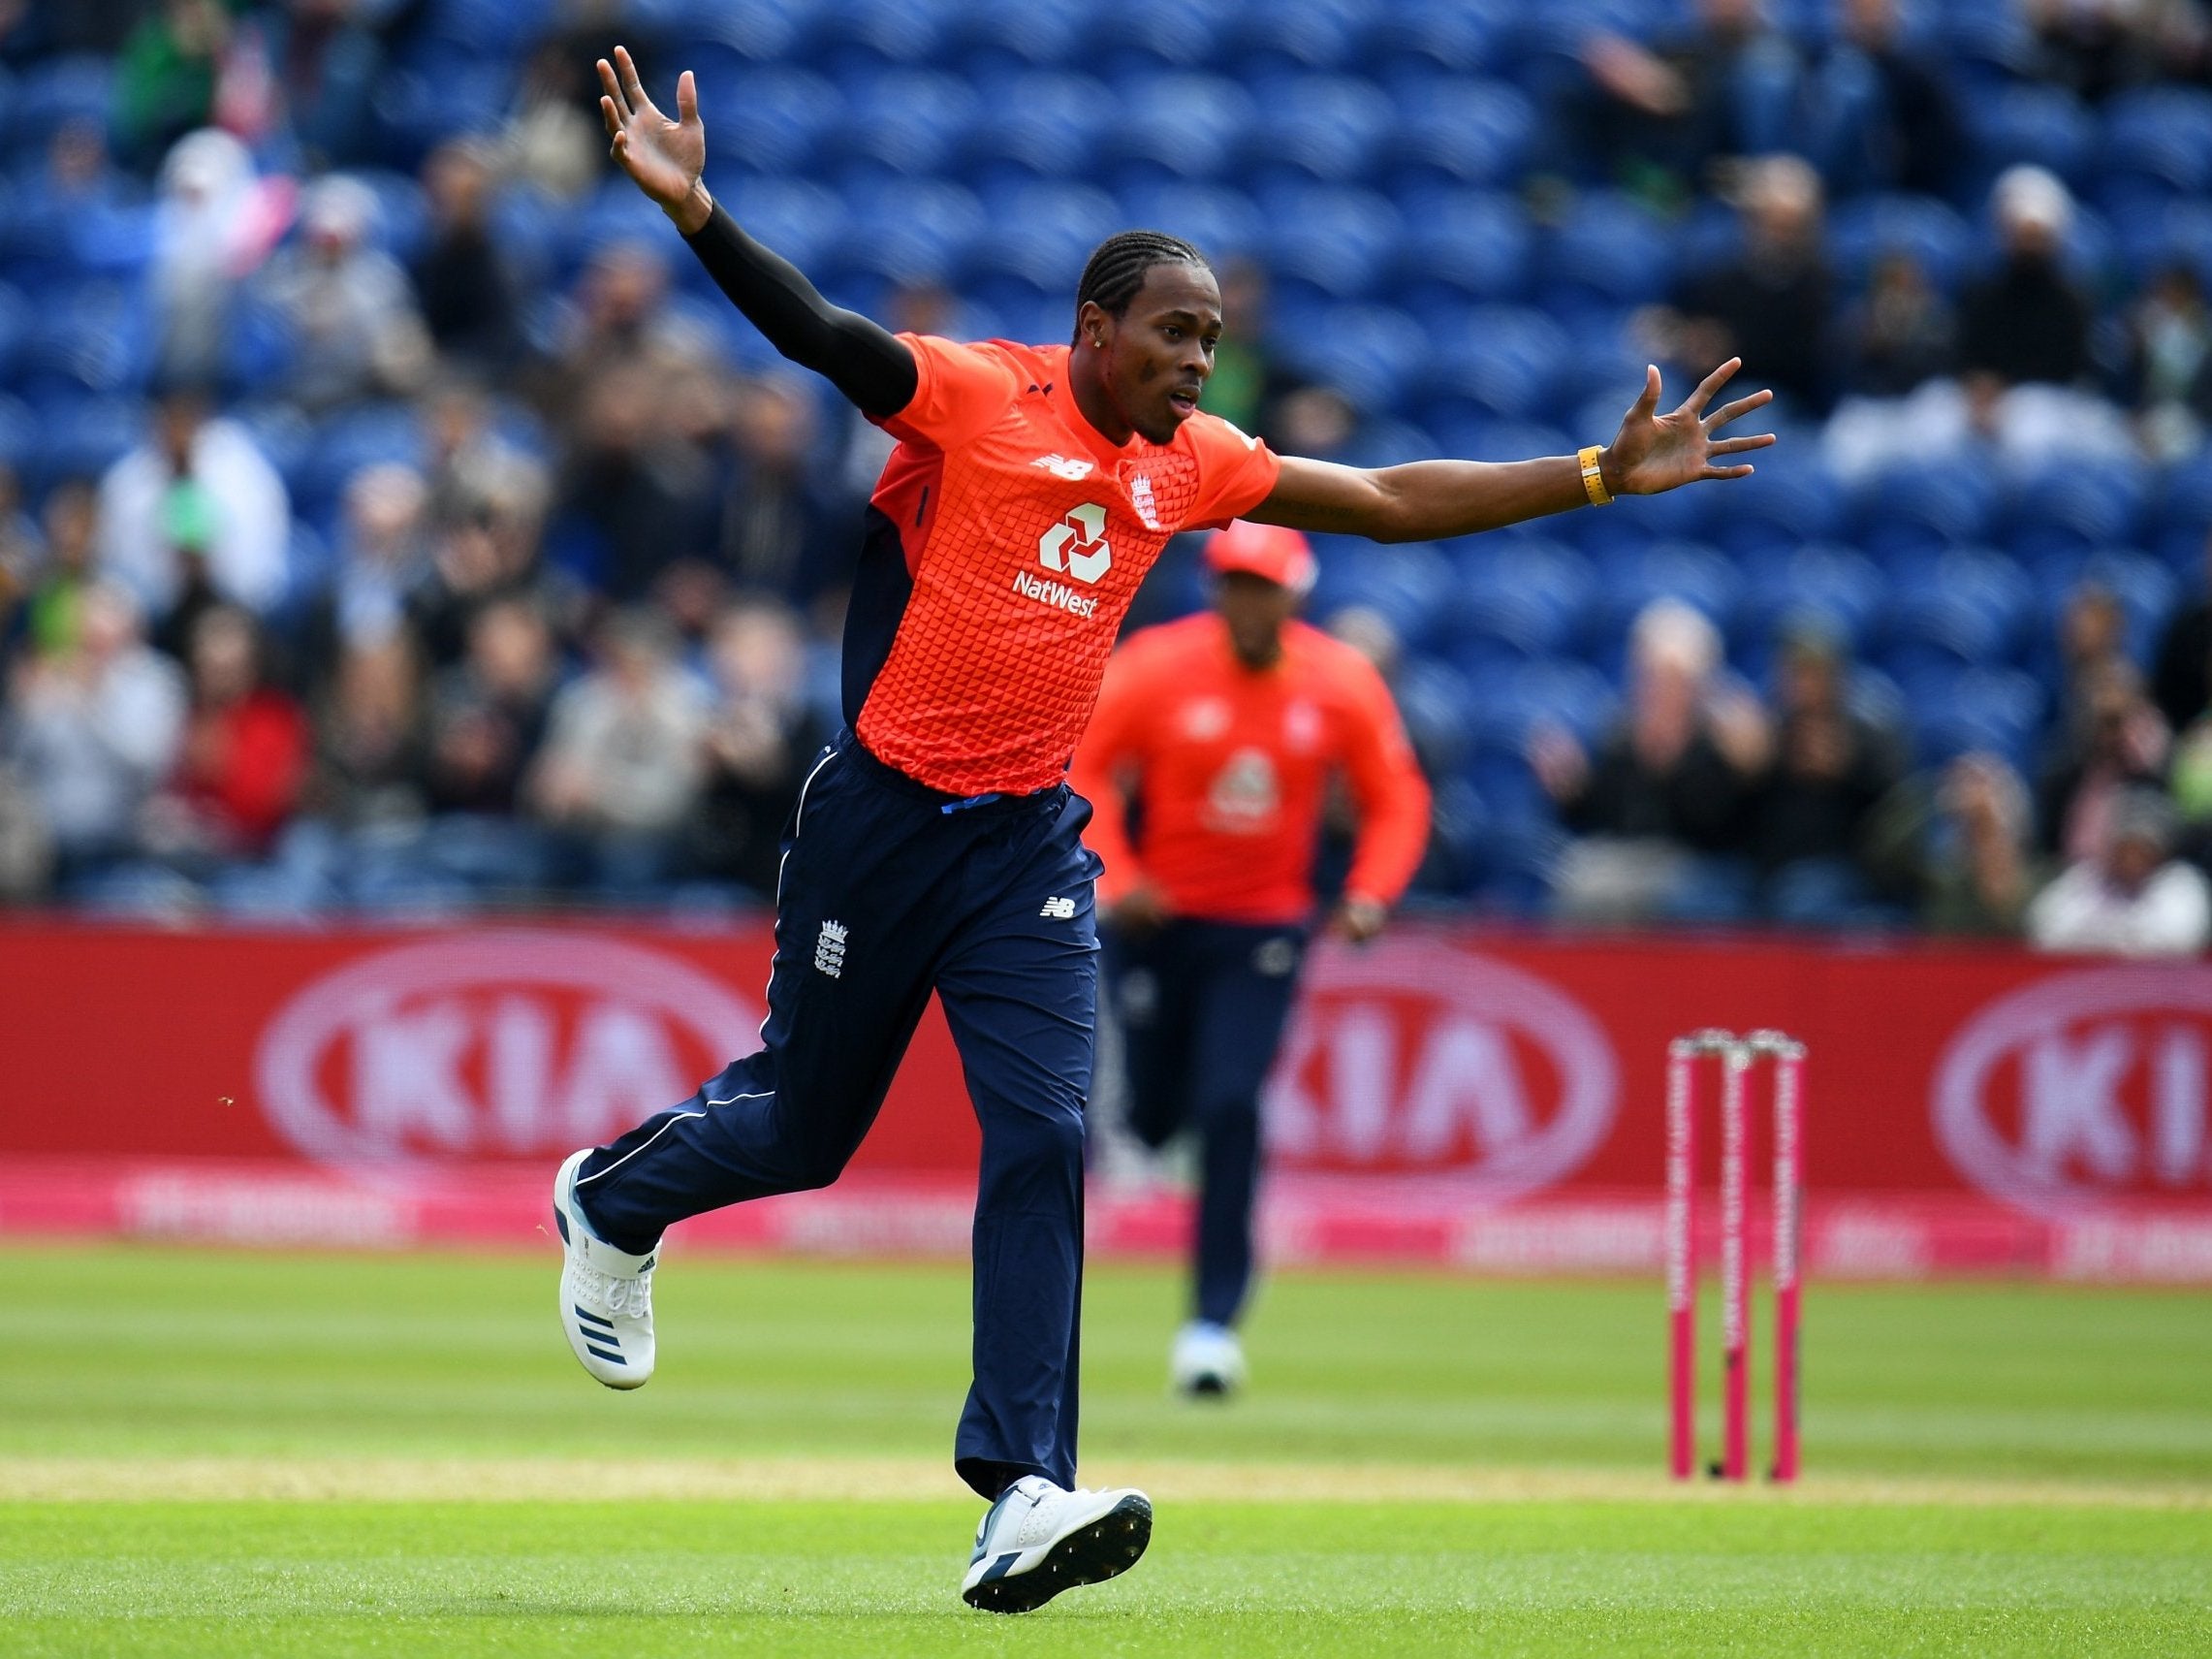 Jofra Archer celebrates taking his first T20 wicket